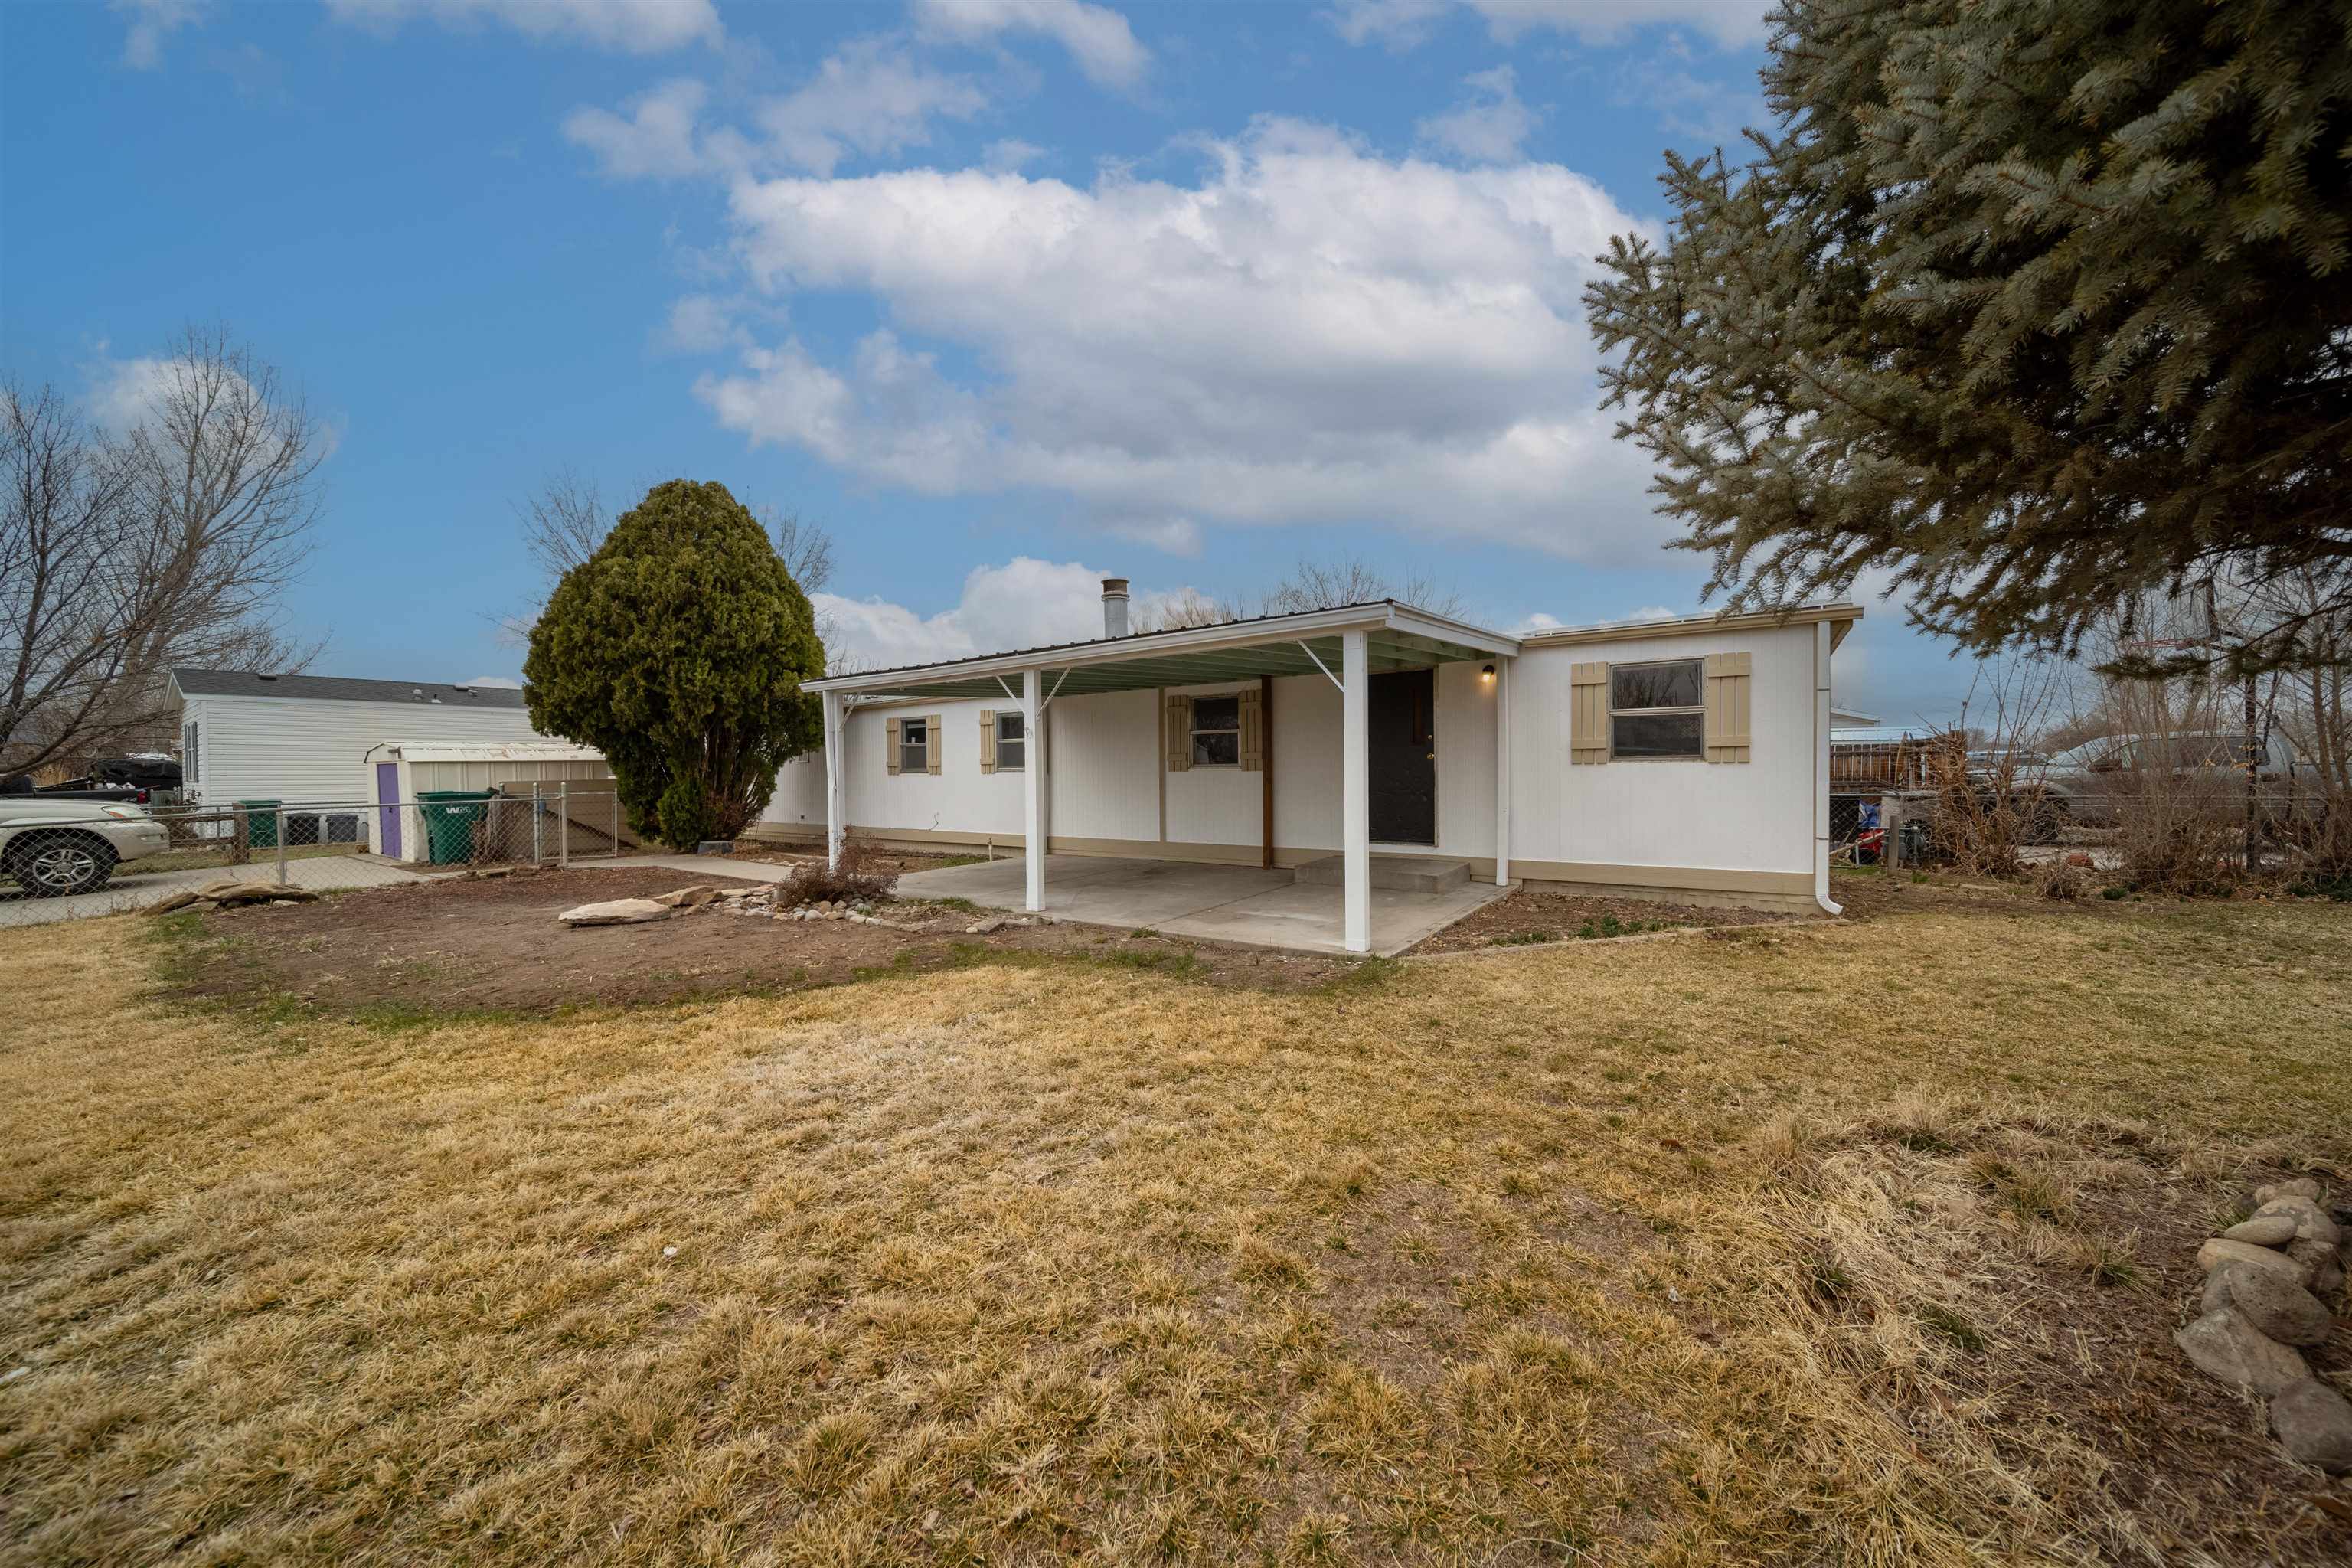 Affordable mobile home on its owned lot in Fruita! Located directly across from a park in Holly Park Subdivision.  Fresh exterior and interior paint.  HOA is for Irrigation Waters.  There is a separate secured lot for RV Parking.   Home is not currently purged, however Seller's have an estimate and are willing to purge if required for Buyer financing.  Come see it today!